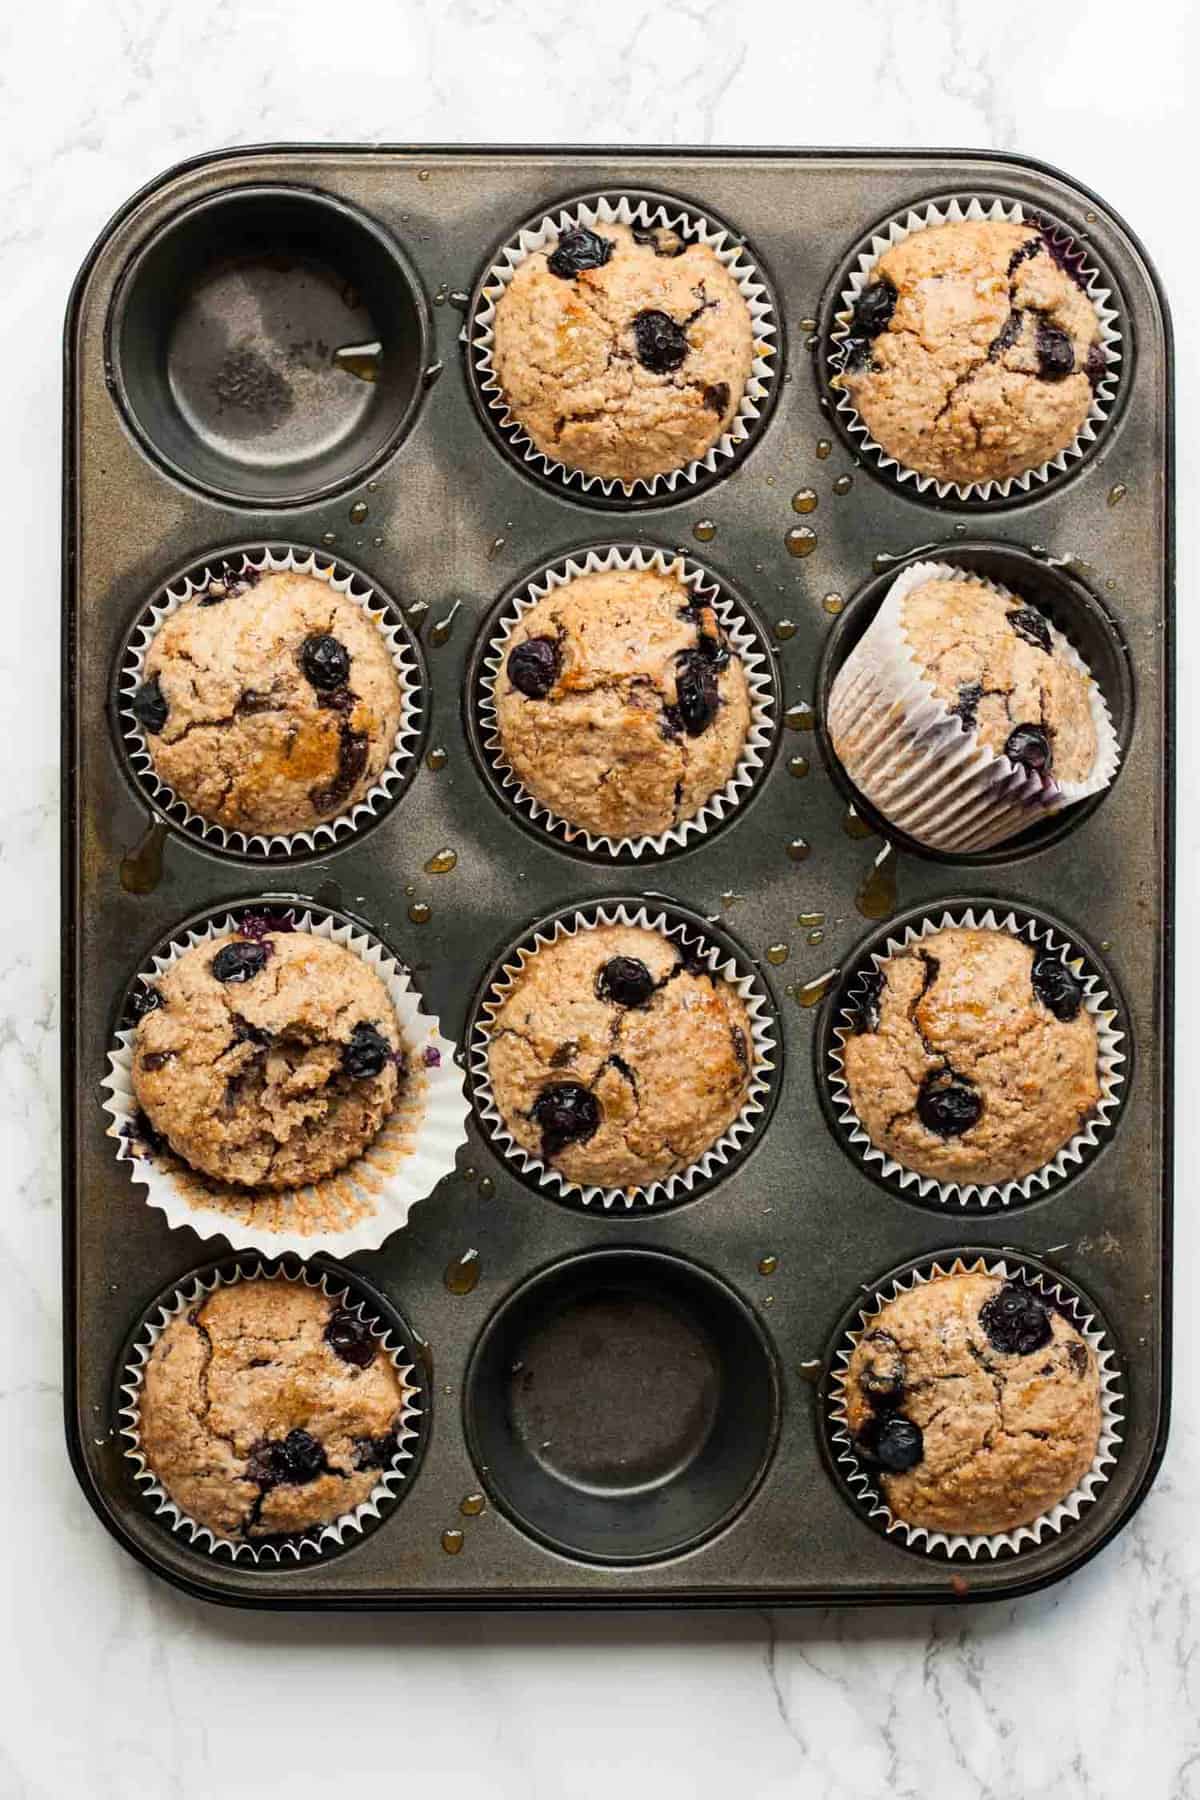 A muffin baking sheet with blueberry breakfast muffins in it.